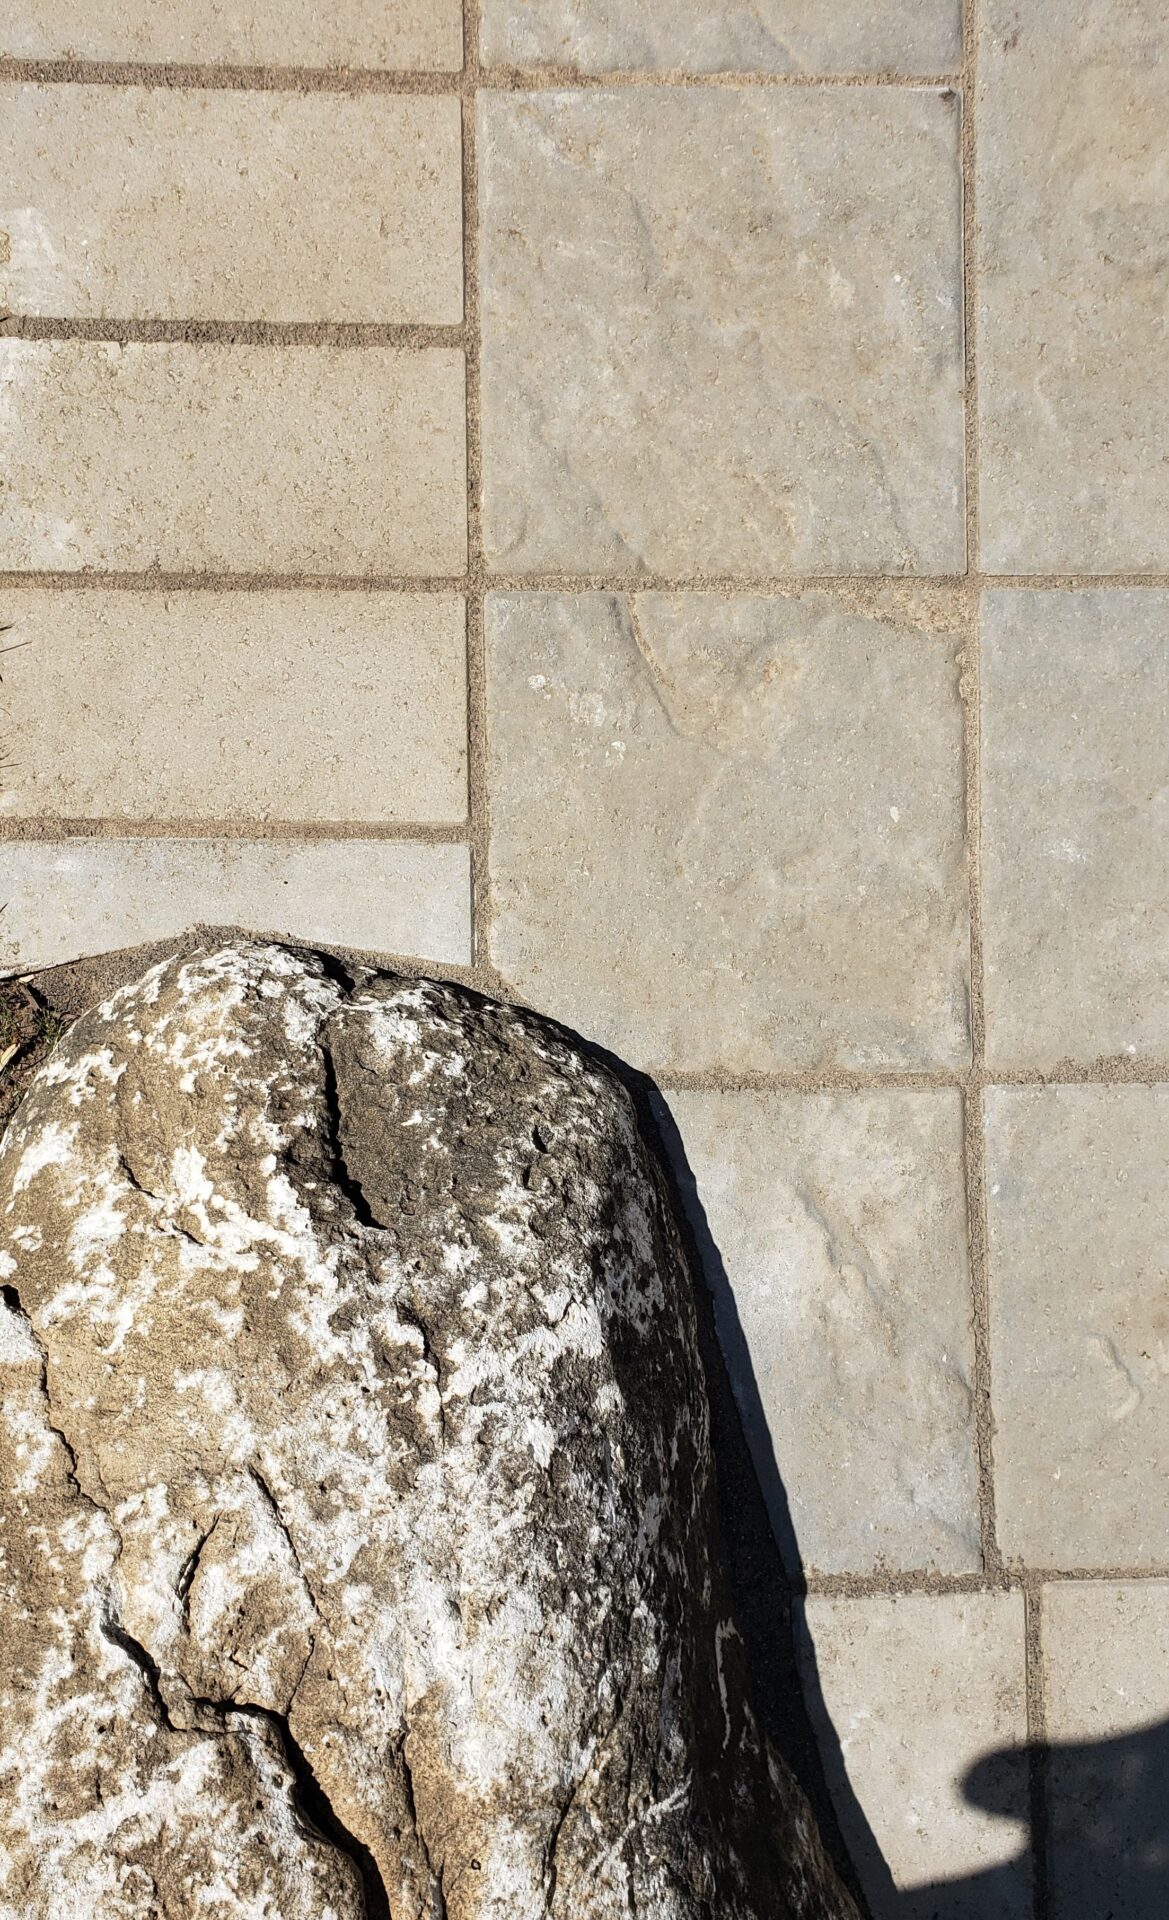 The image shows a textured rock with white spots near patterned tiles, casting a shadow on a sunny day, creating a contrast of textures.